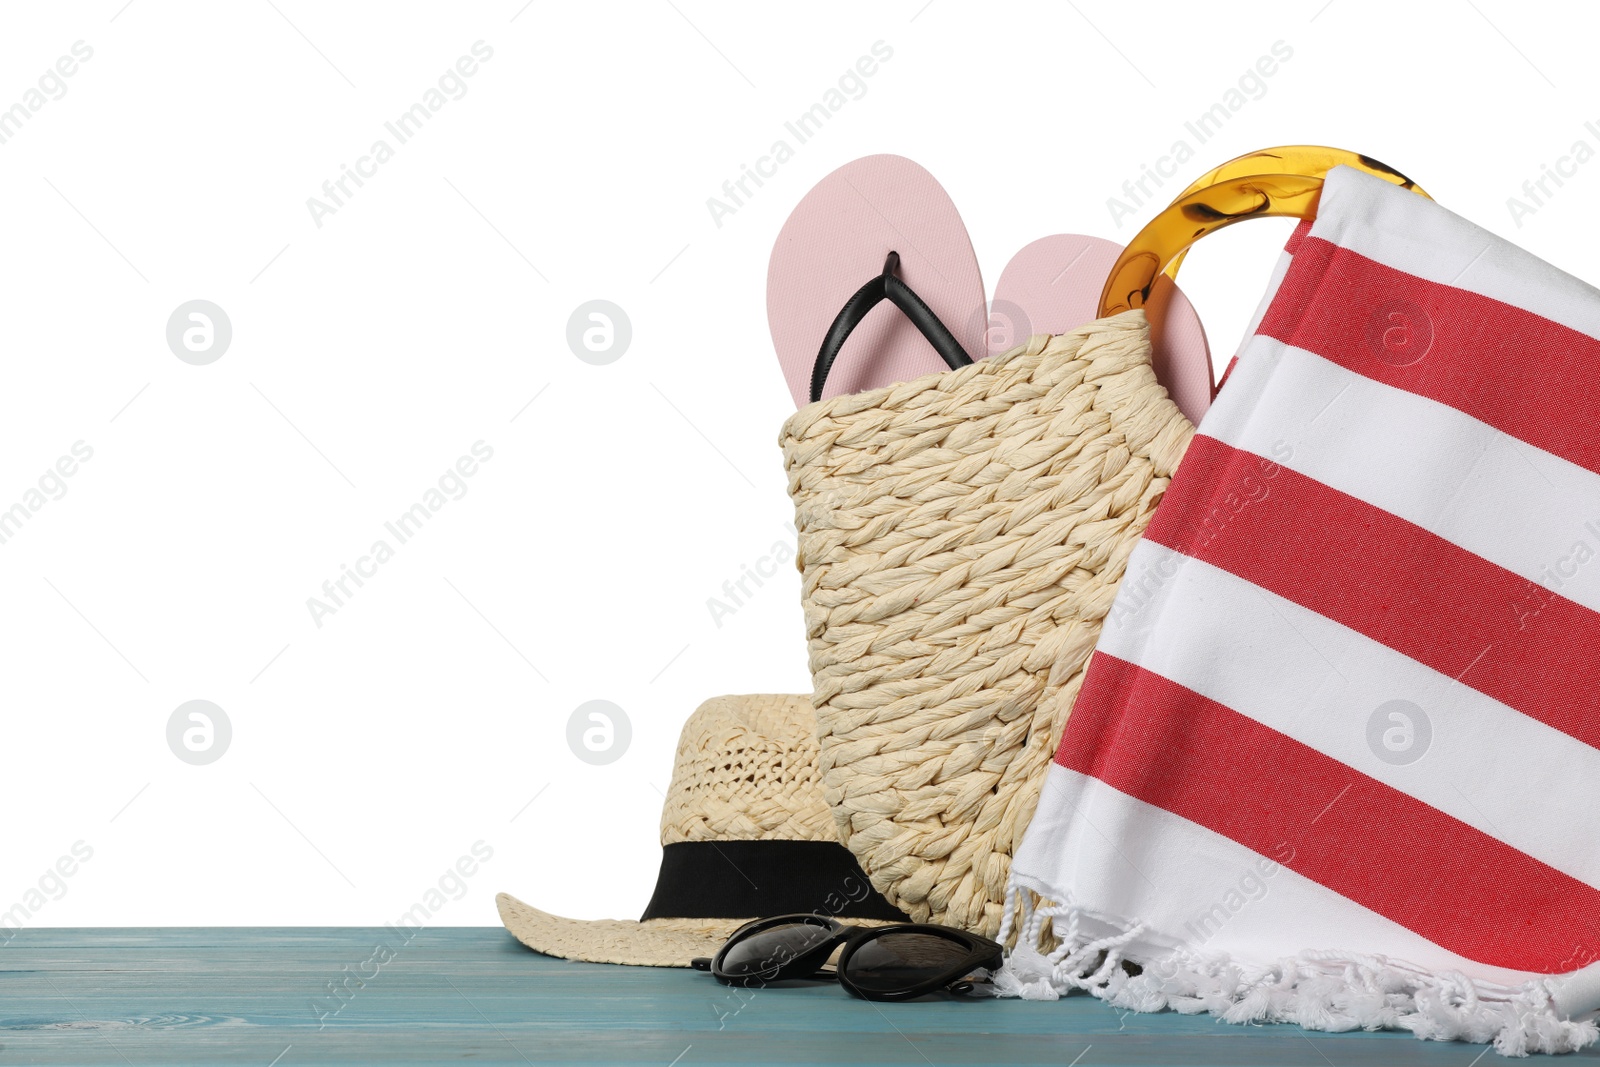 Photo of Beach bag with towel, flip flops, hat and sunglasses on light blue wooden surface against white background. Space for text